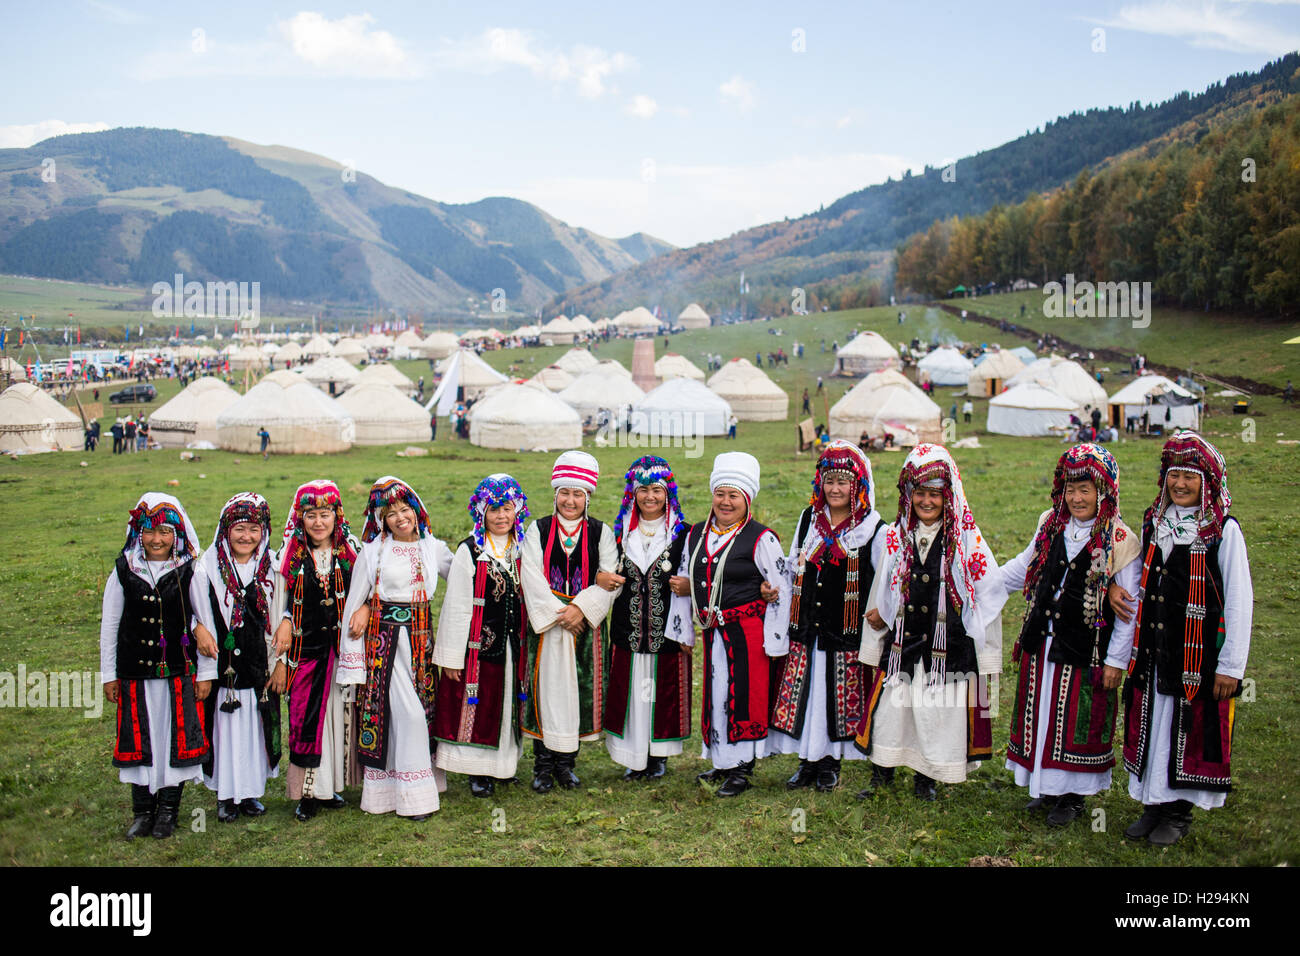 A Kyrgyz womens' singing group pose in costume after an informal performance at Jailoo Kyrchyn during the World Nomad Games in September 2016. Stock Photo